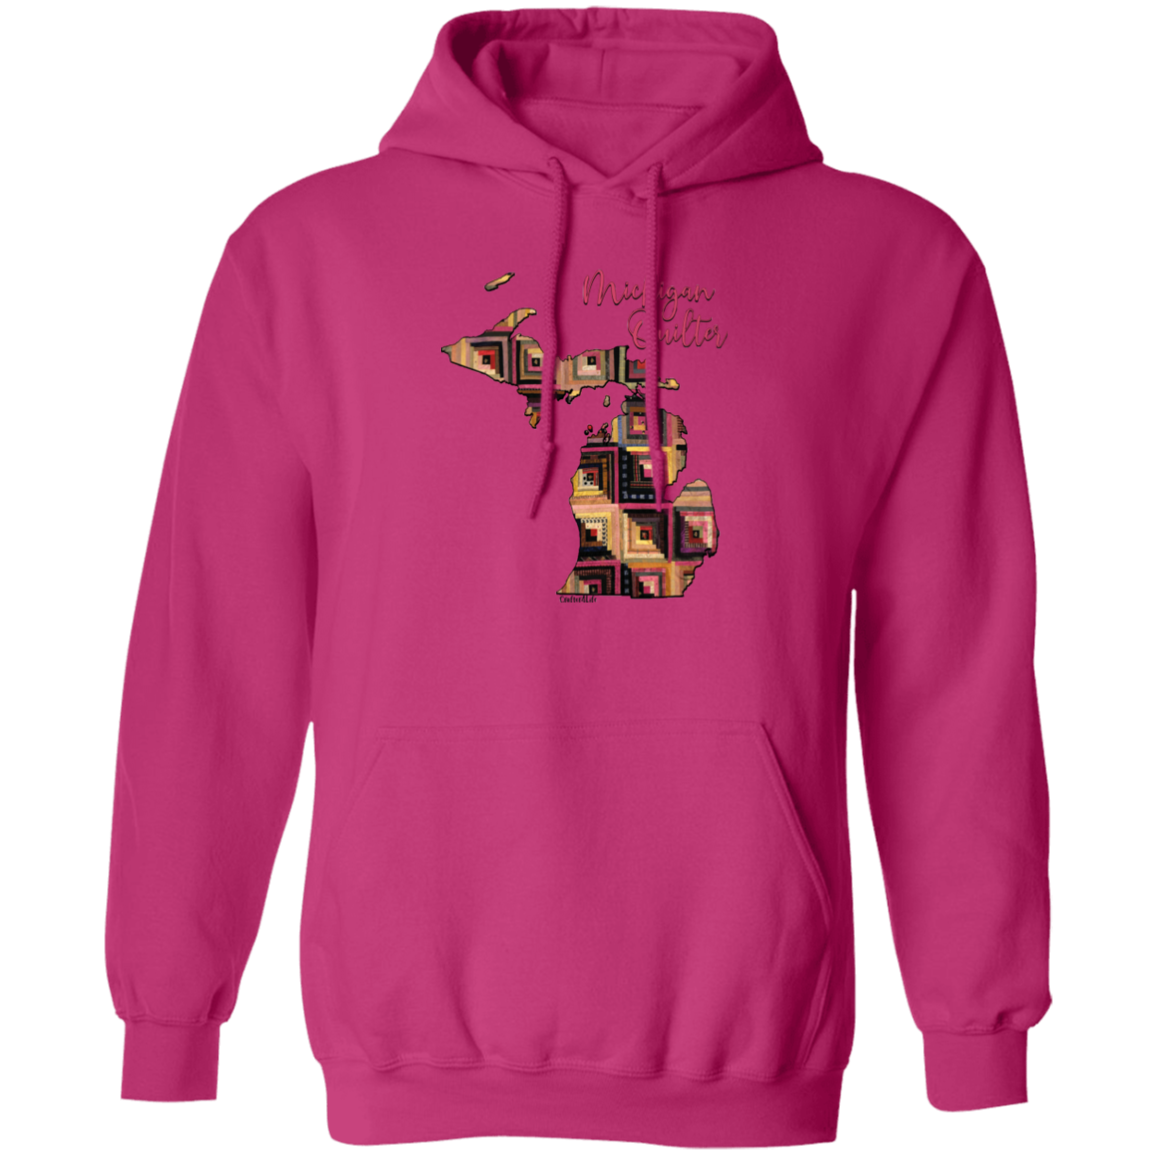 Michigan Quilter Pullover Hoodie, Gift for Quilting Friends and Family